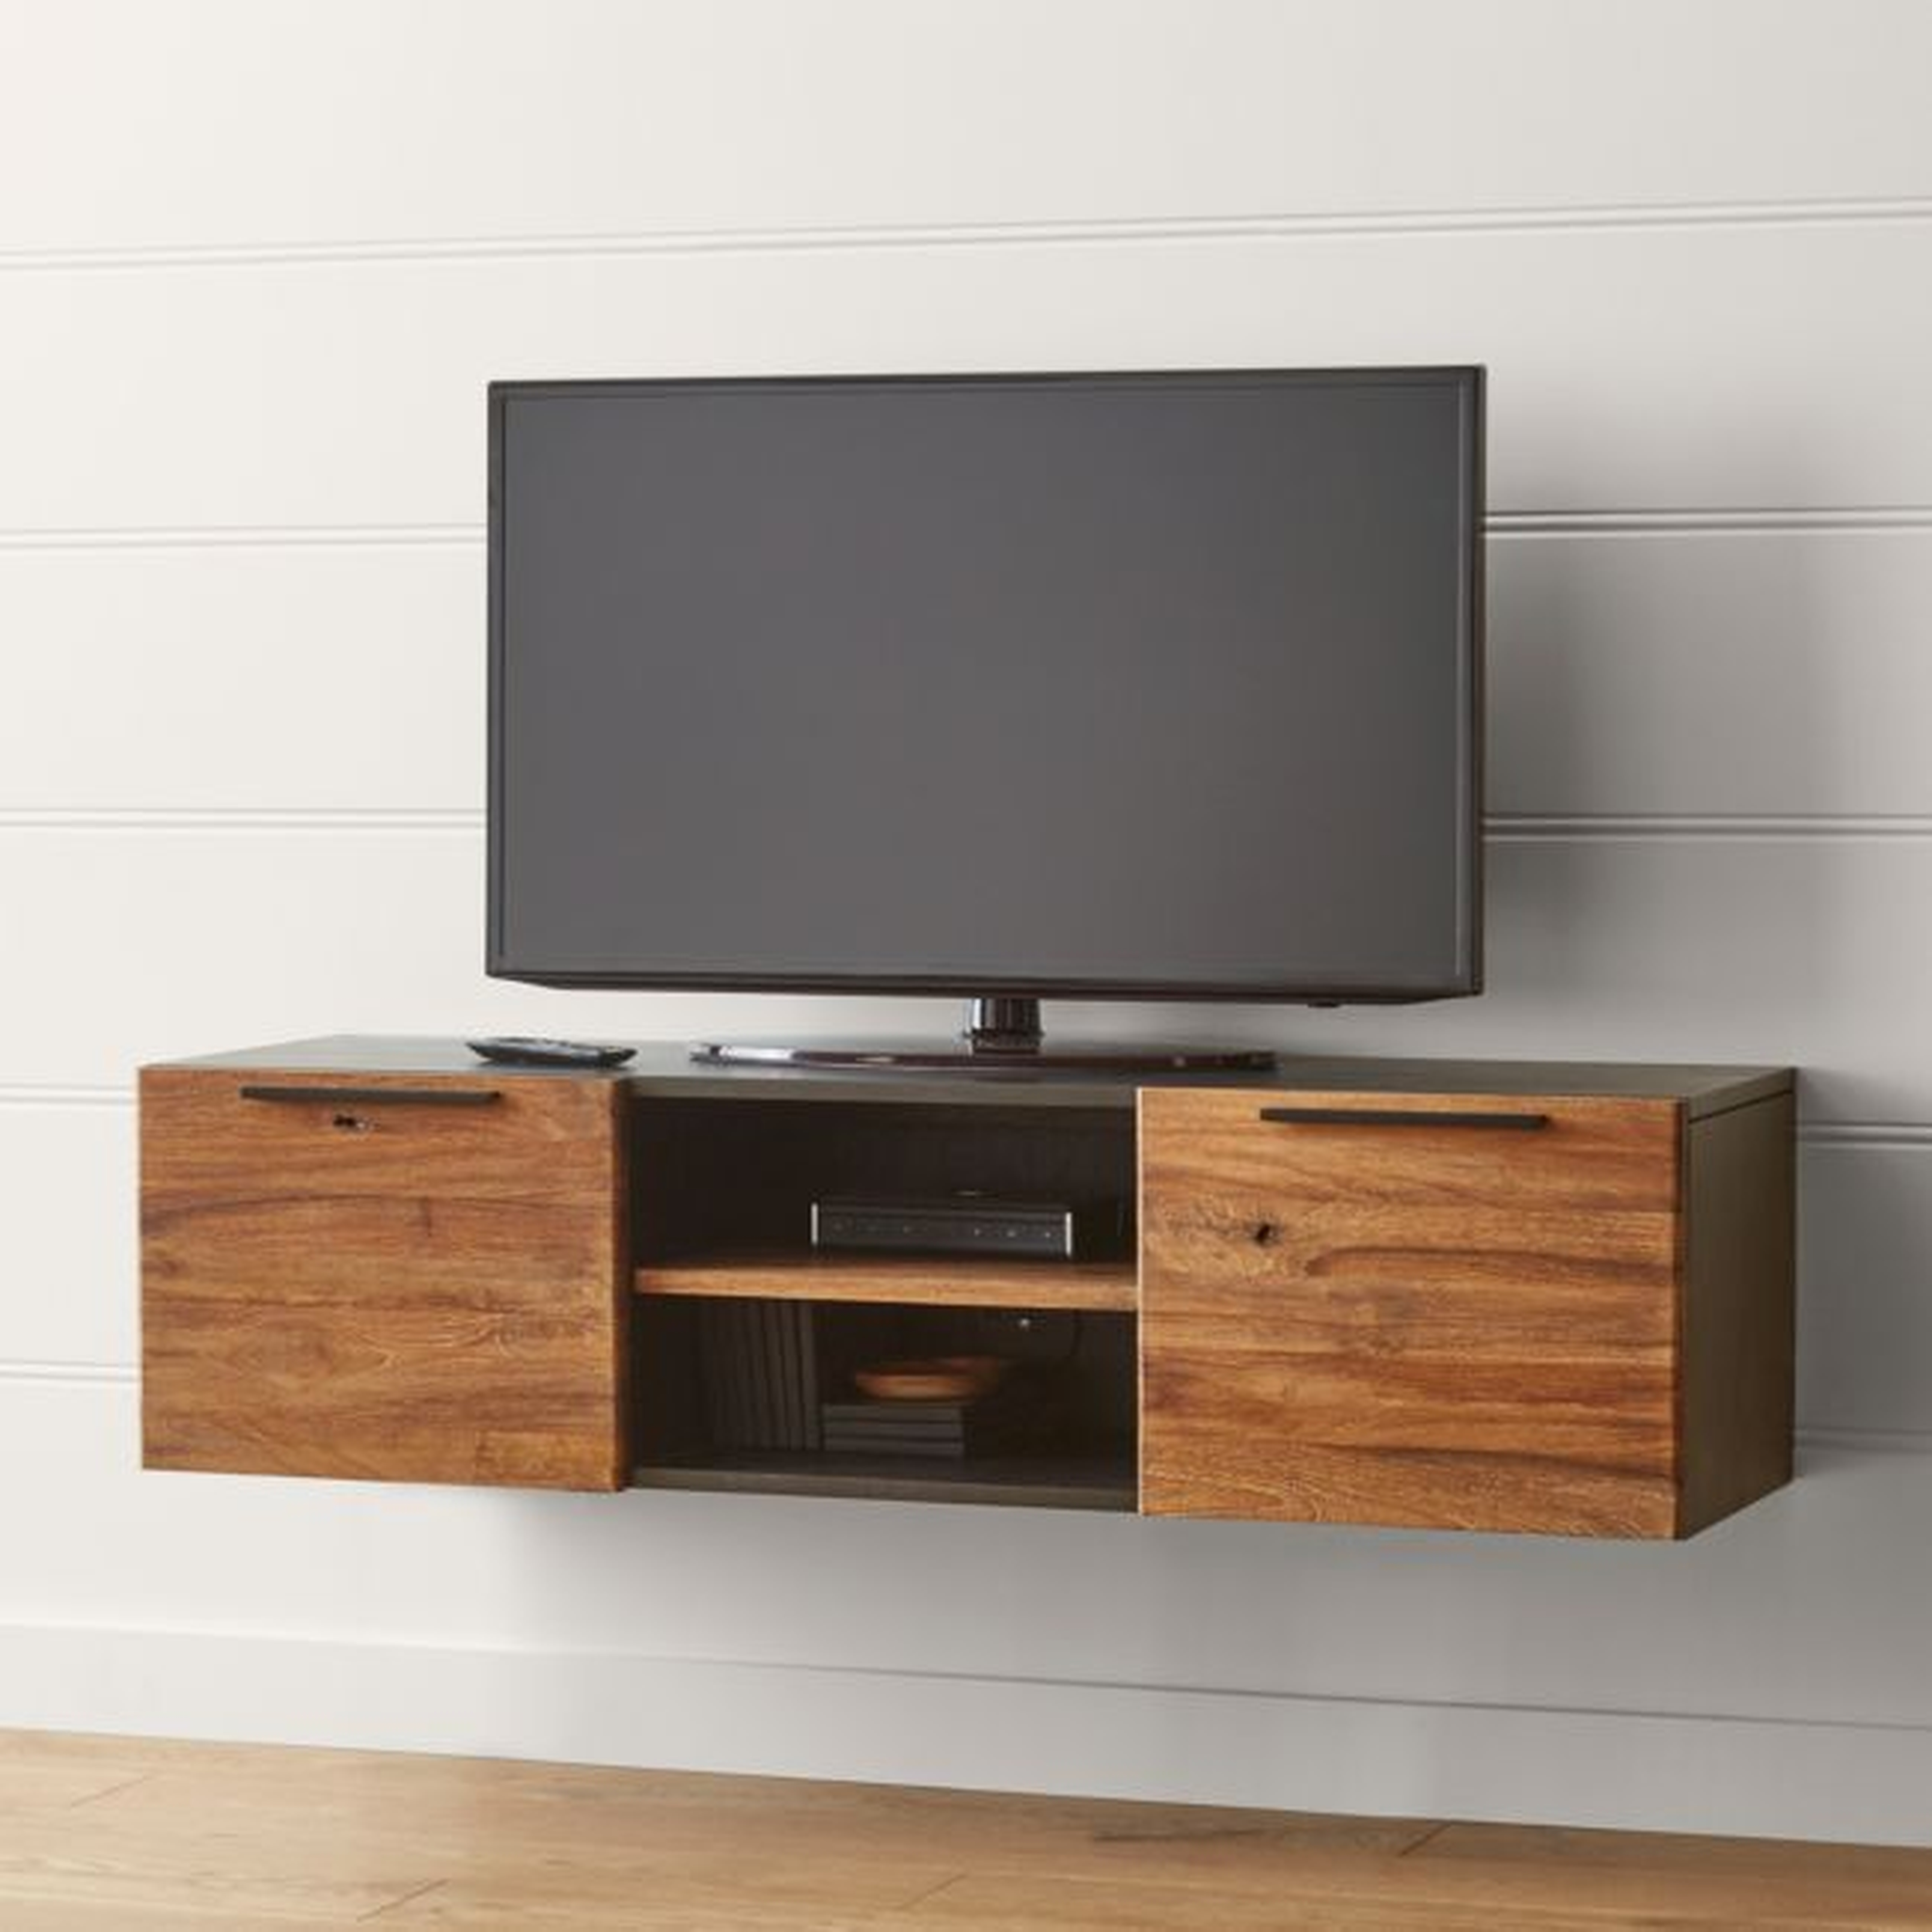 Rigby Natural 55" Small Floating Media Console - Crate and Barrel